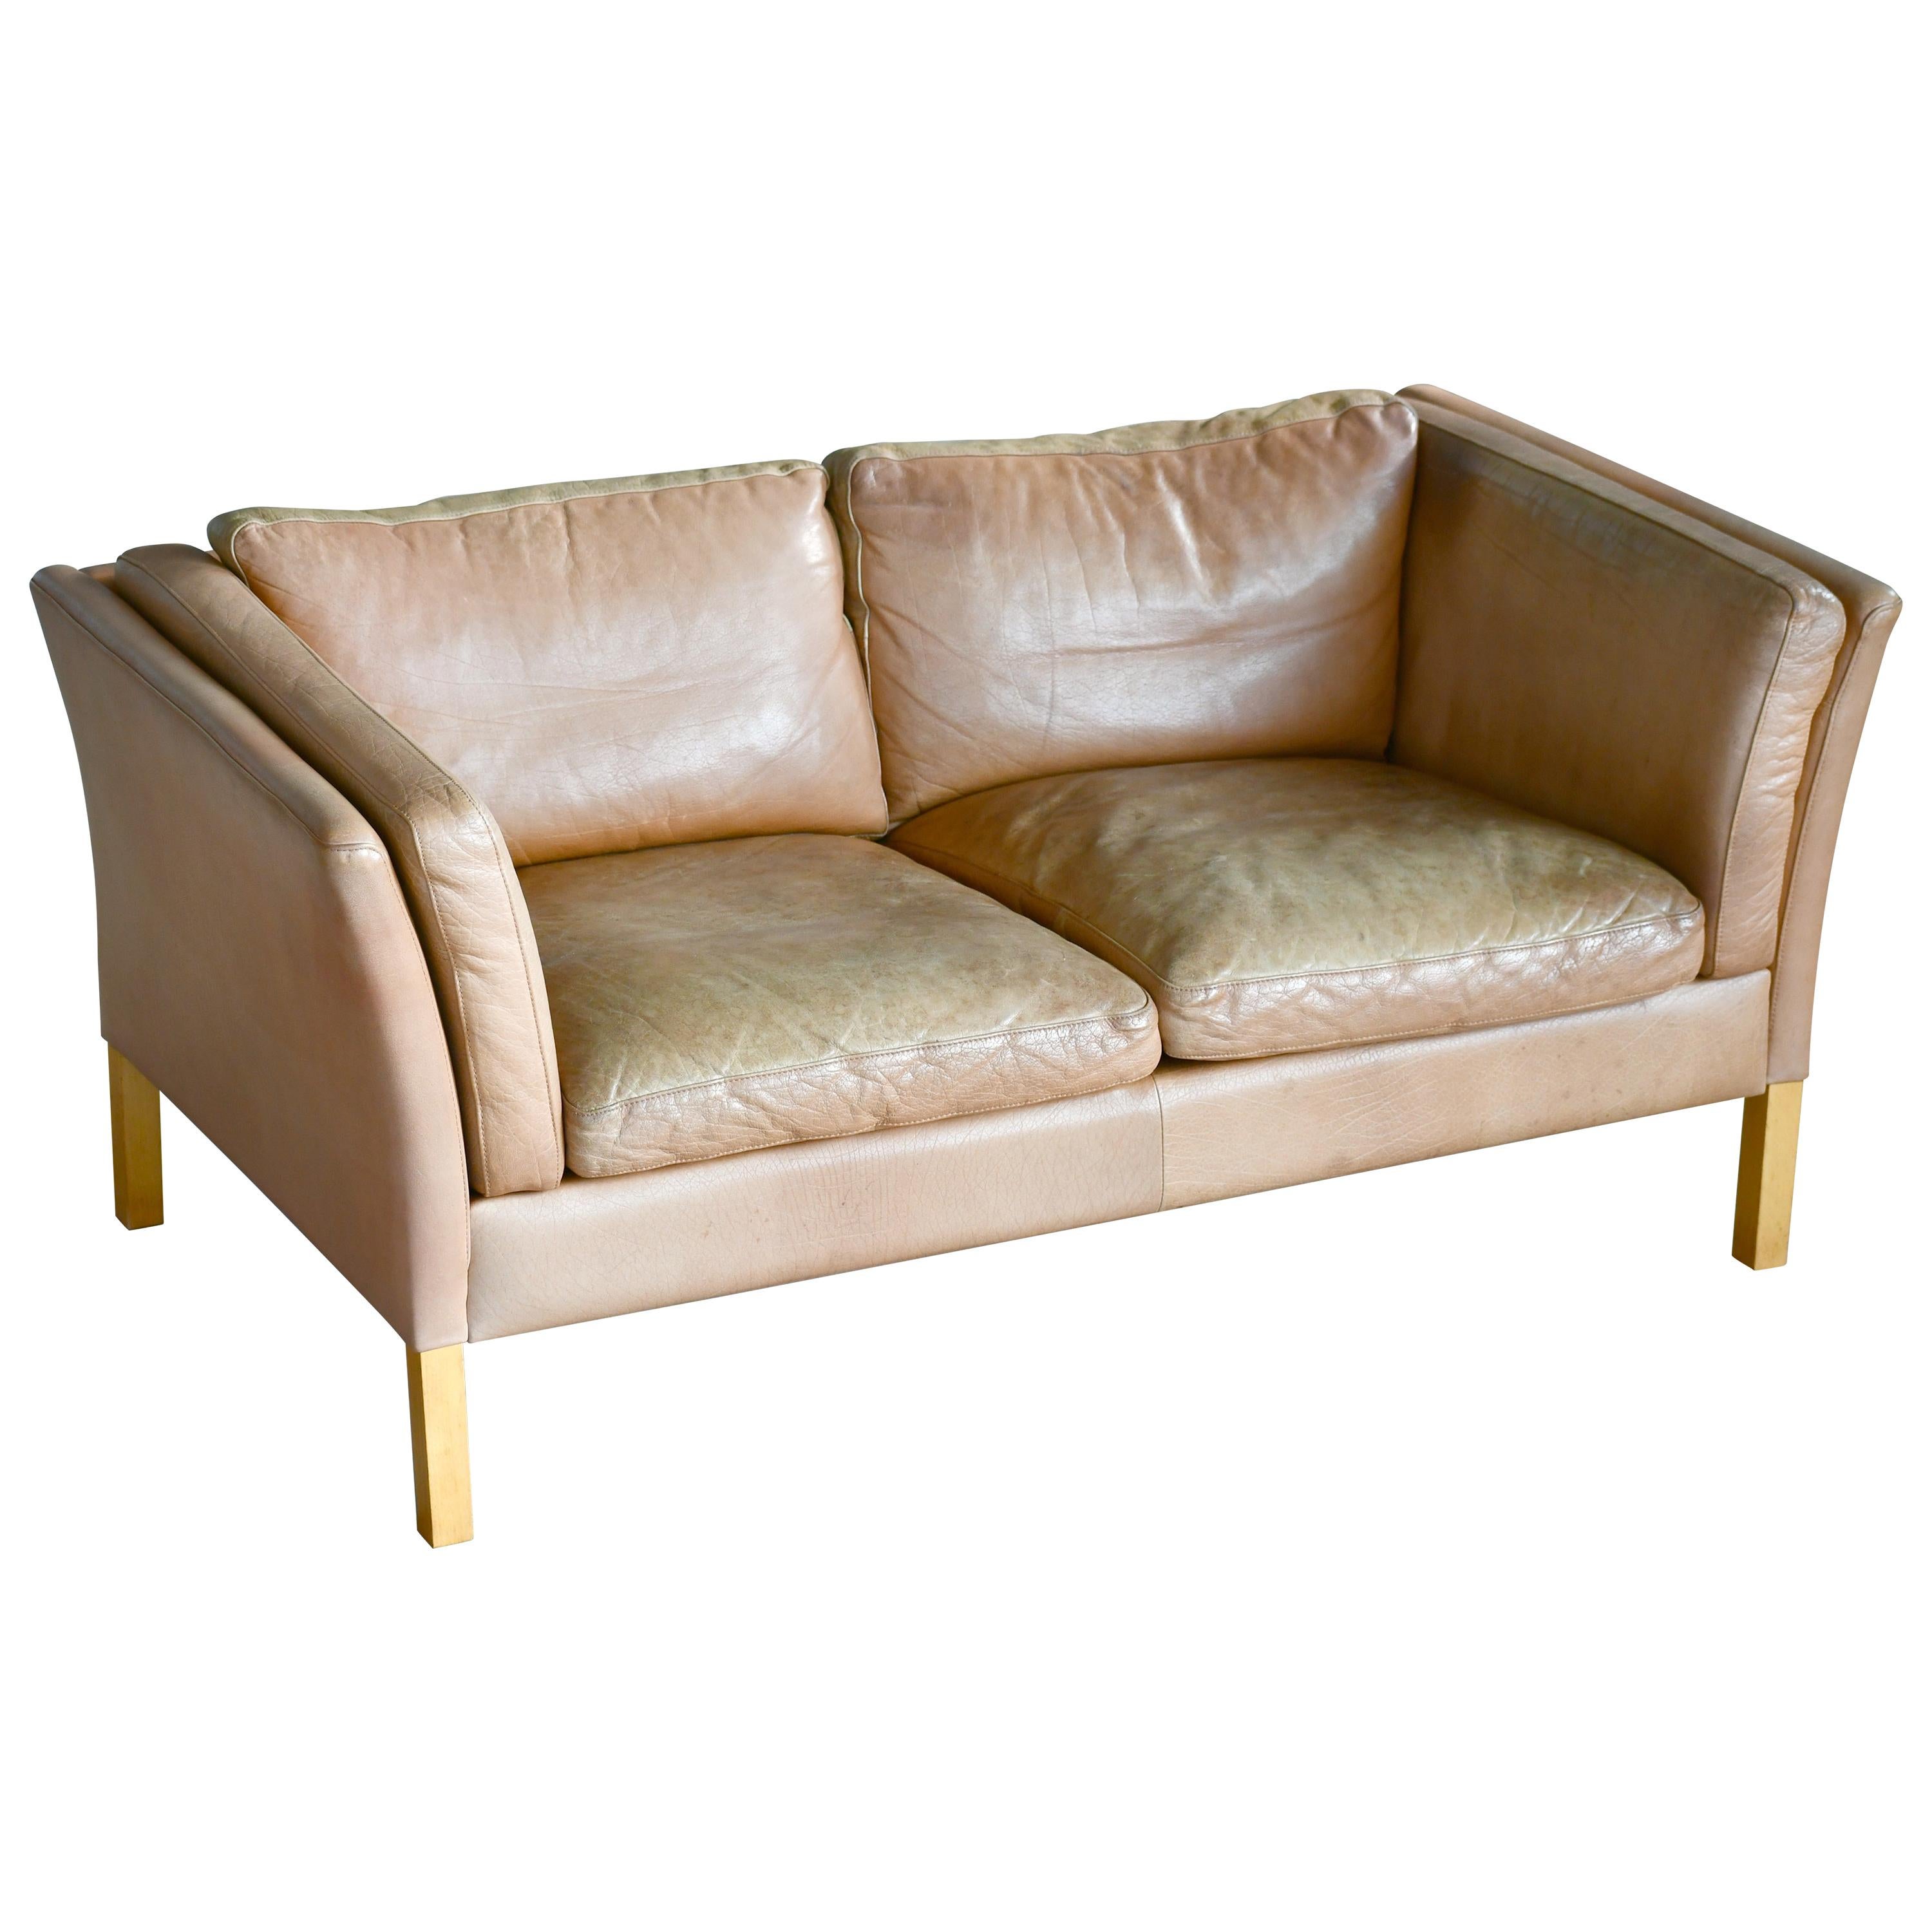 Danish Loveseat in Butterscotch Worn Leather by Stouby Mobler